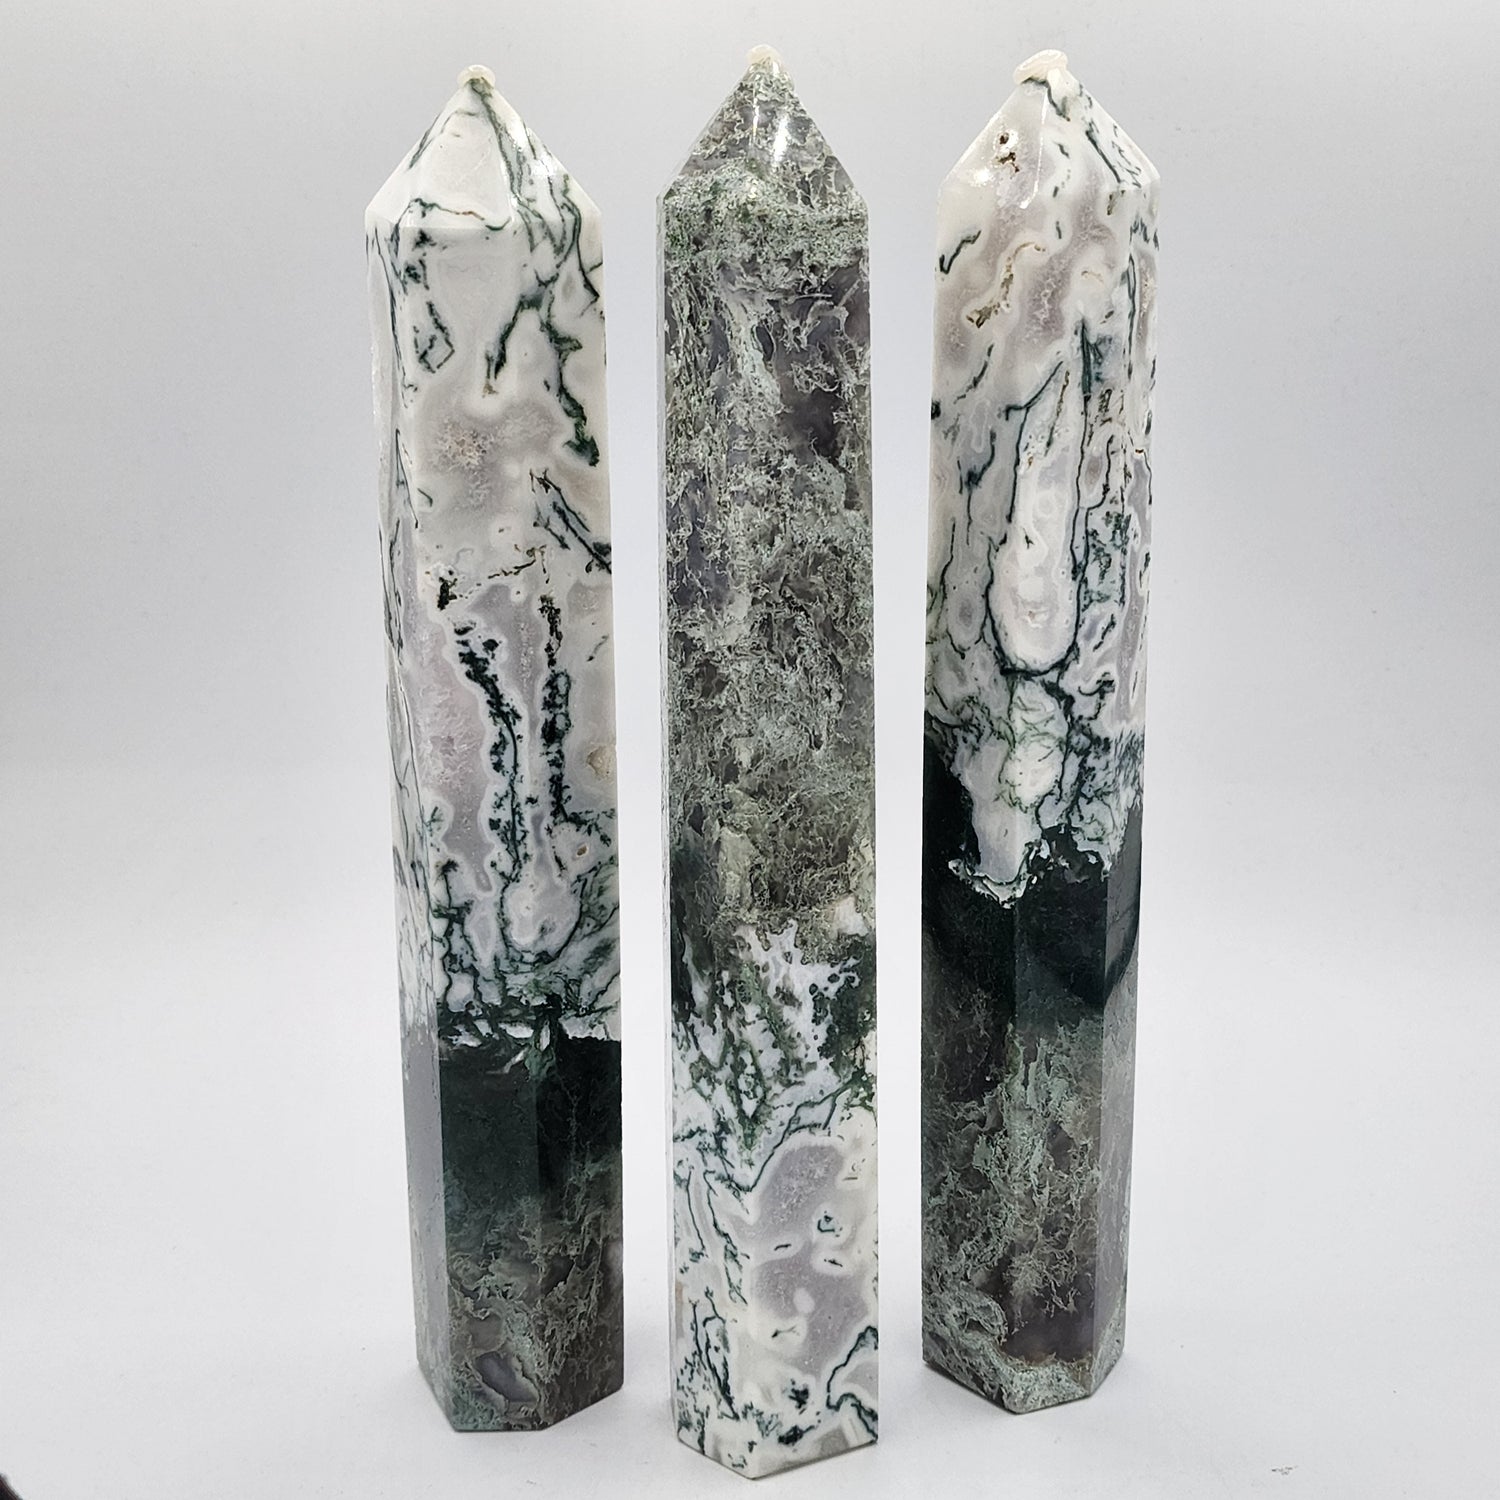 Crystal Towers: Embrace Healing and Serenity Through Sacred Gems